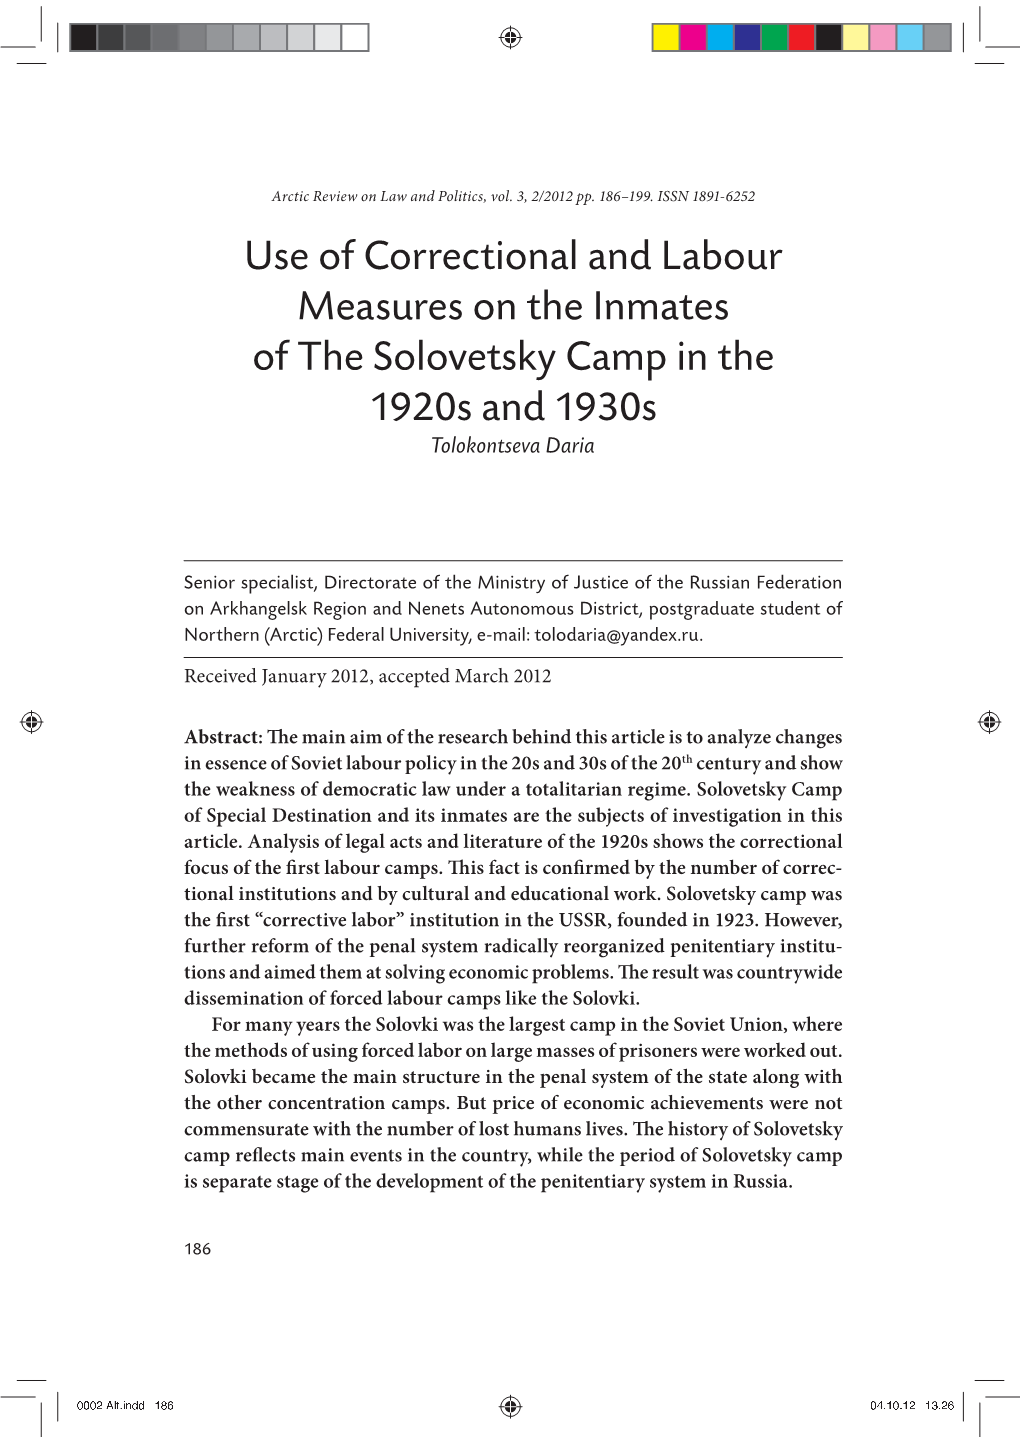 Use of Correctional and Labour Measures on the Inmates of the Solovetsky Camp in the 1920S and 1930S Tolokontseva Daria